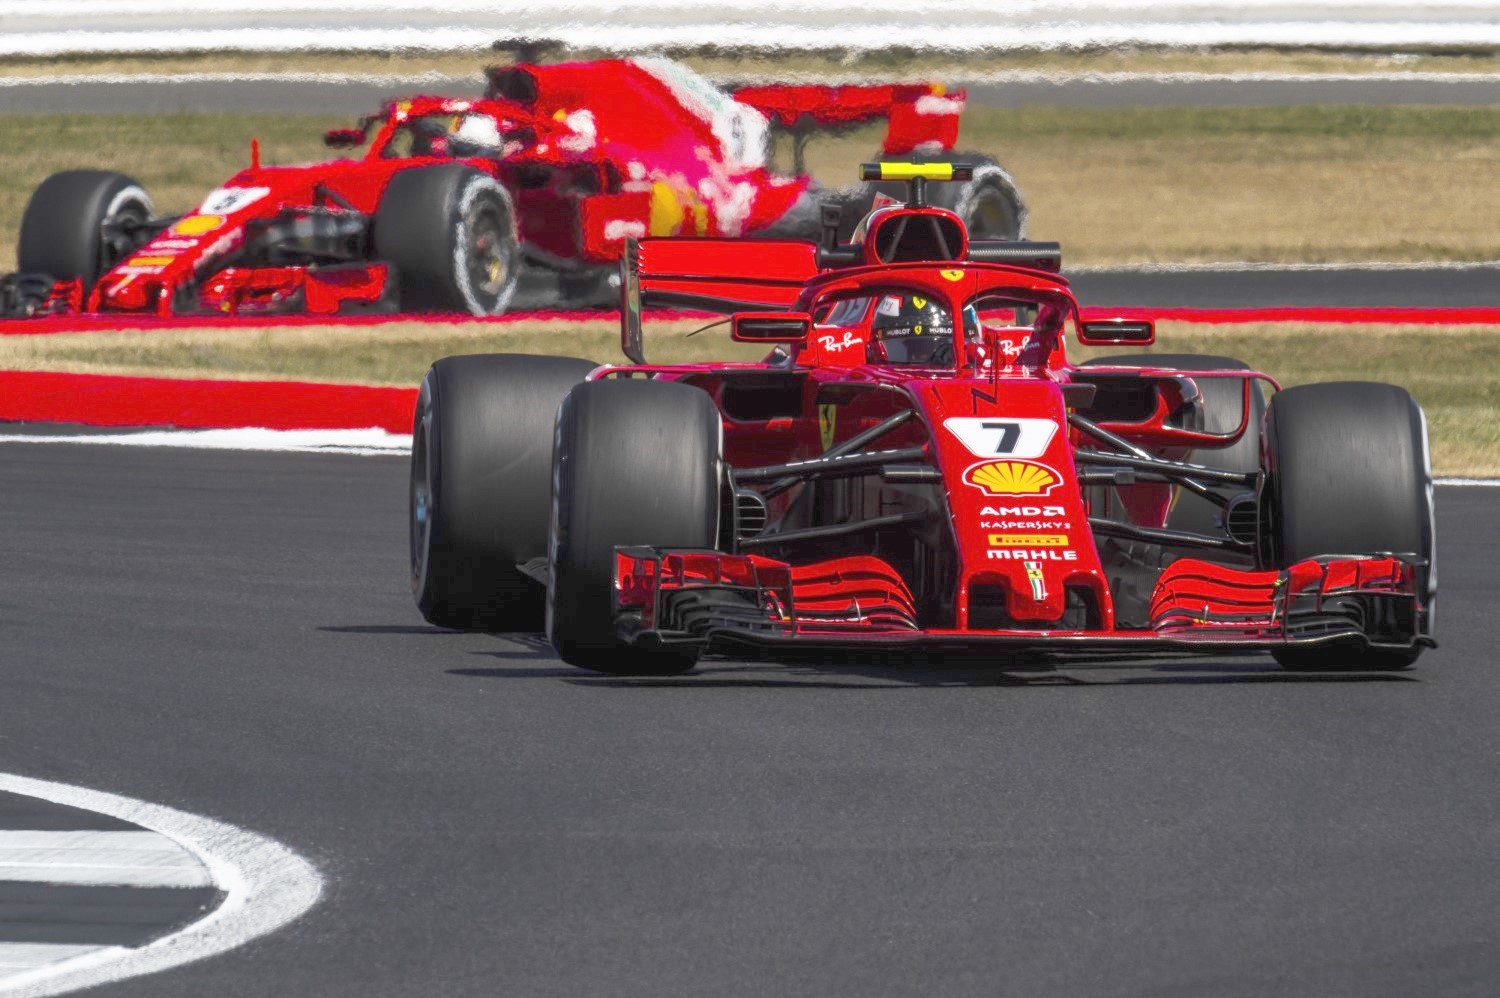 The Ferrari engine may be more powerful but the Aldo Costa Mercedes chassis is still king